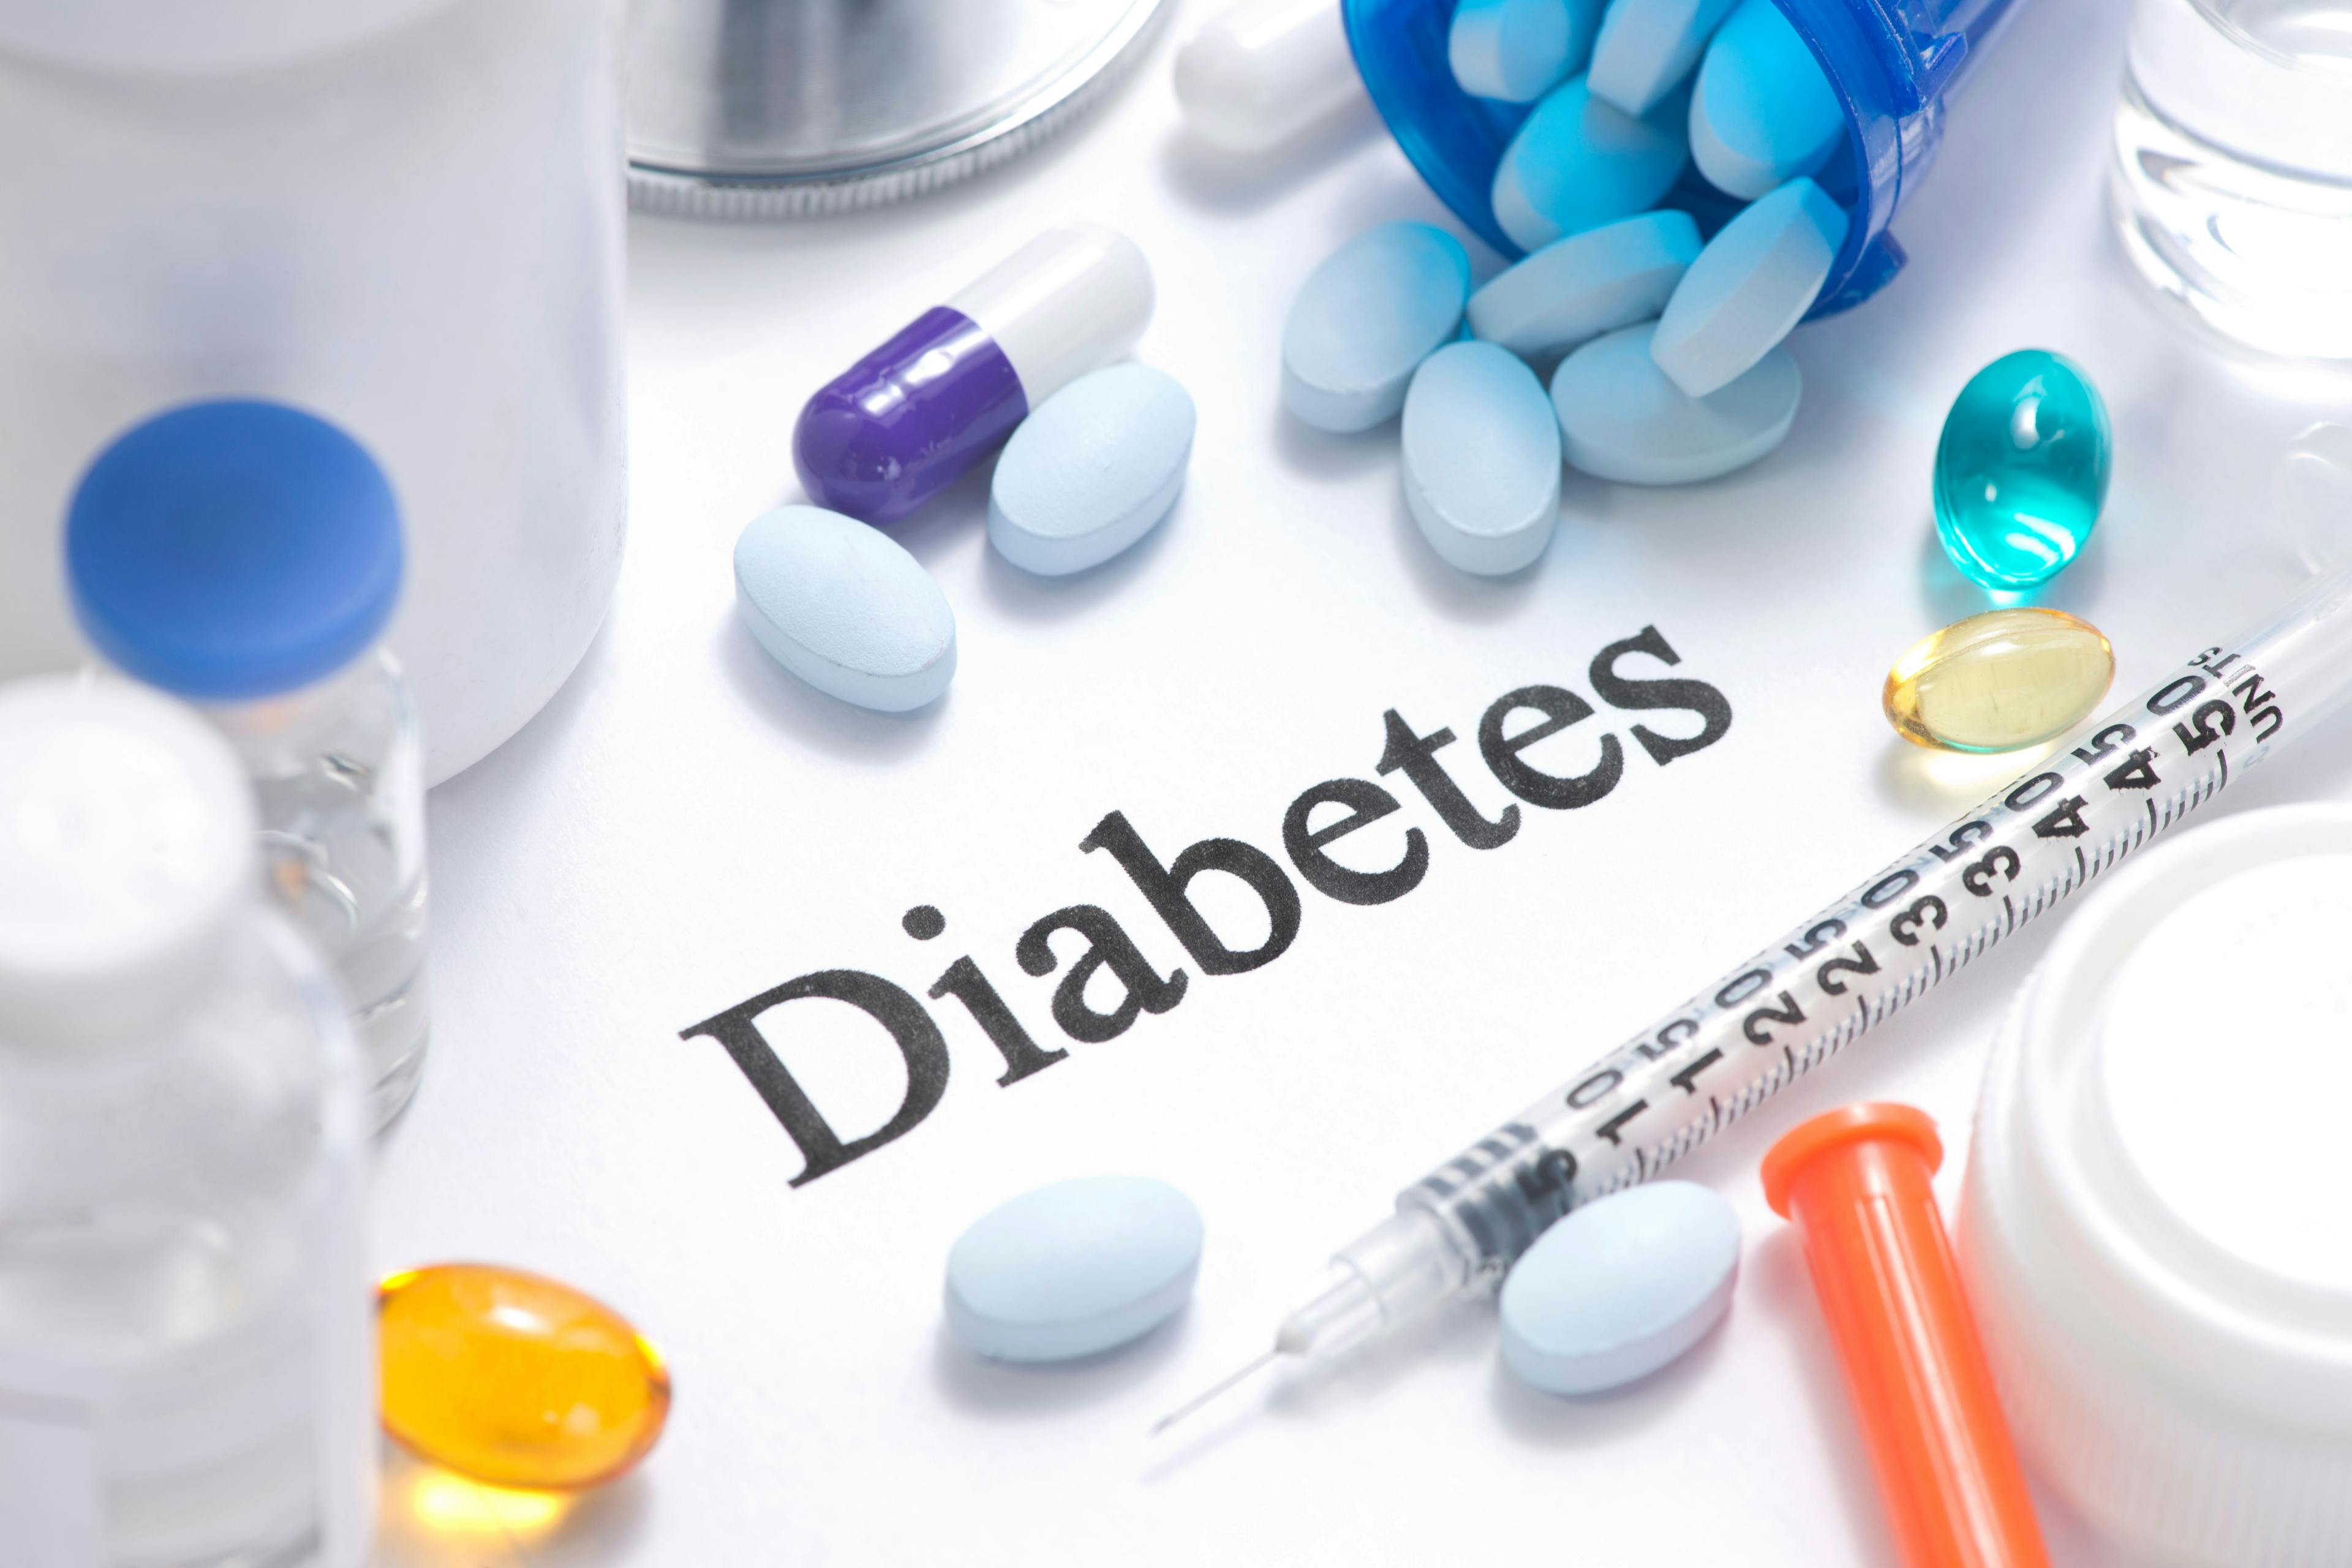 Diabetes | Image Credit: Sherry Young - stock.adobe.com